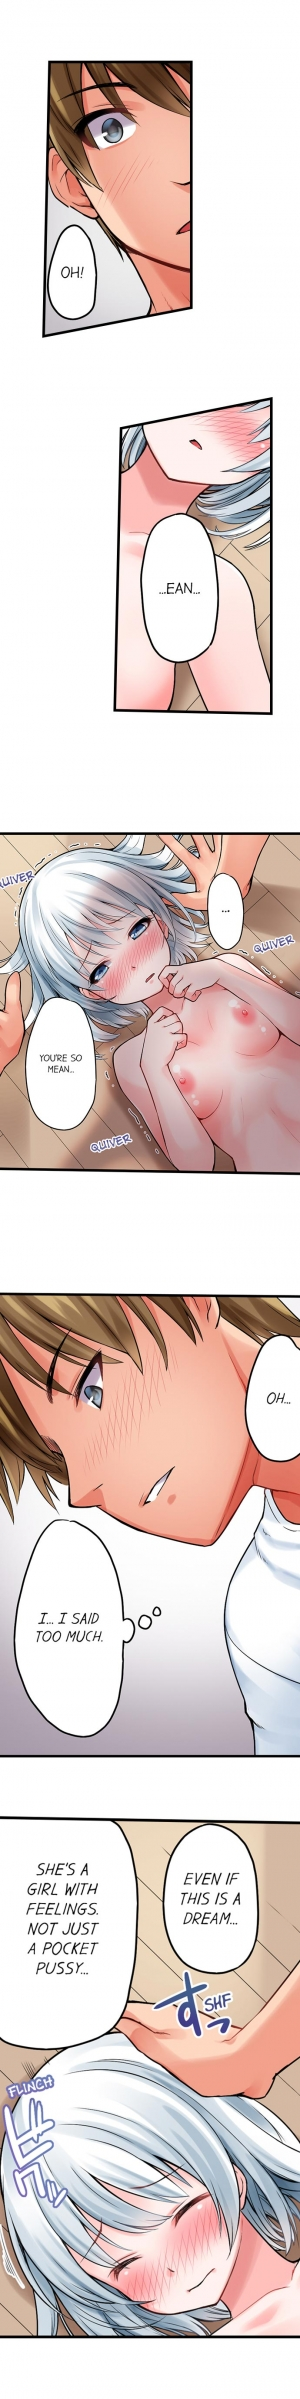 [Kintarou] The Descent to Earth of The Great Pussy Virgin Ch. 1-9 (Ongoing) [English] - Page 18